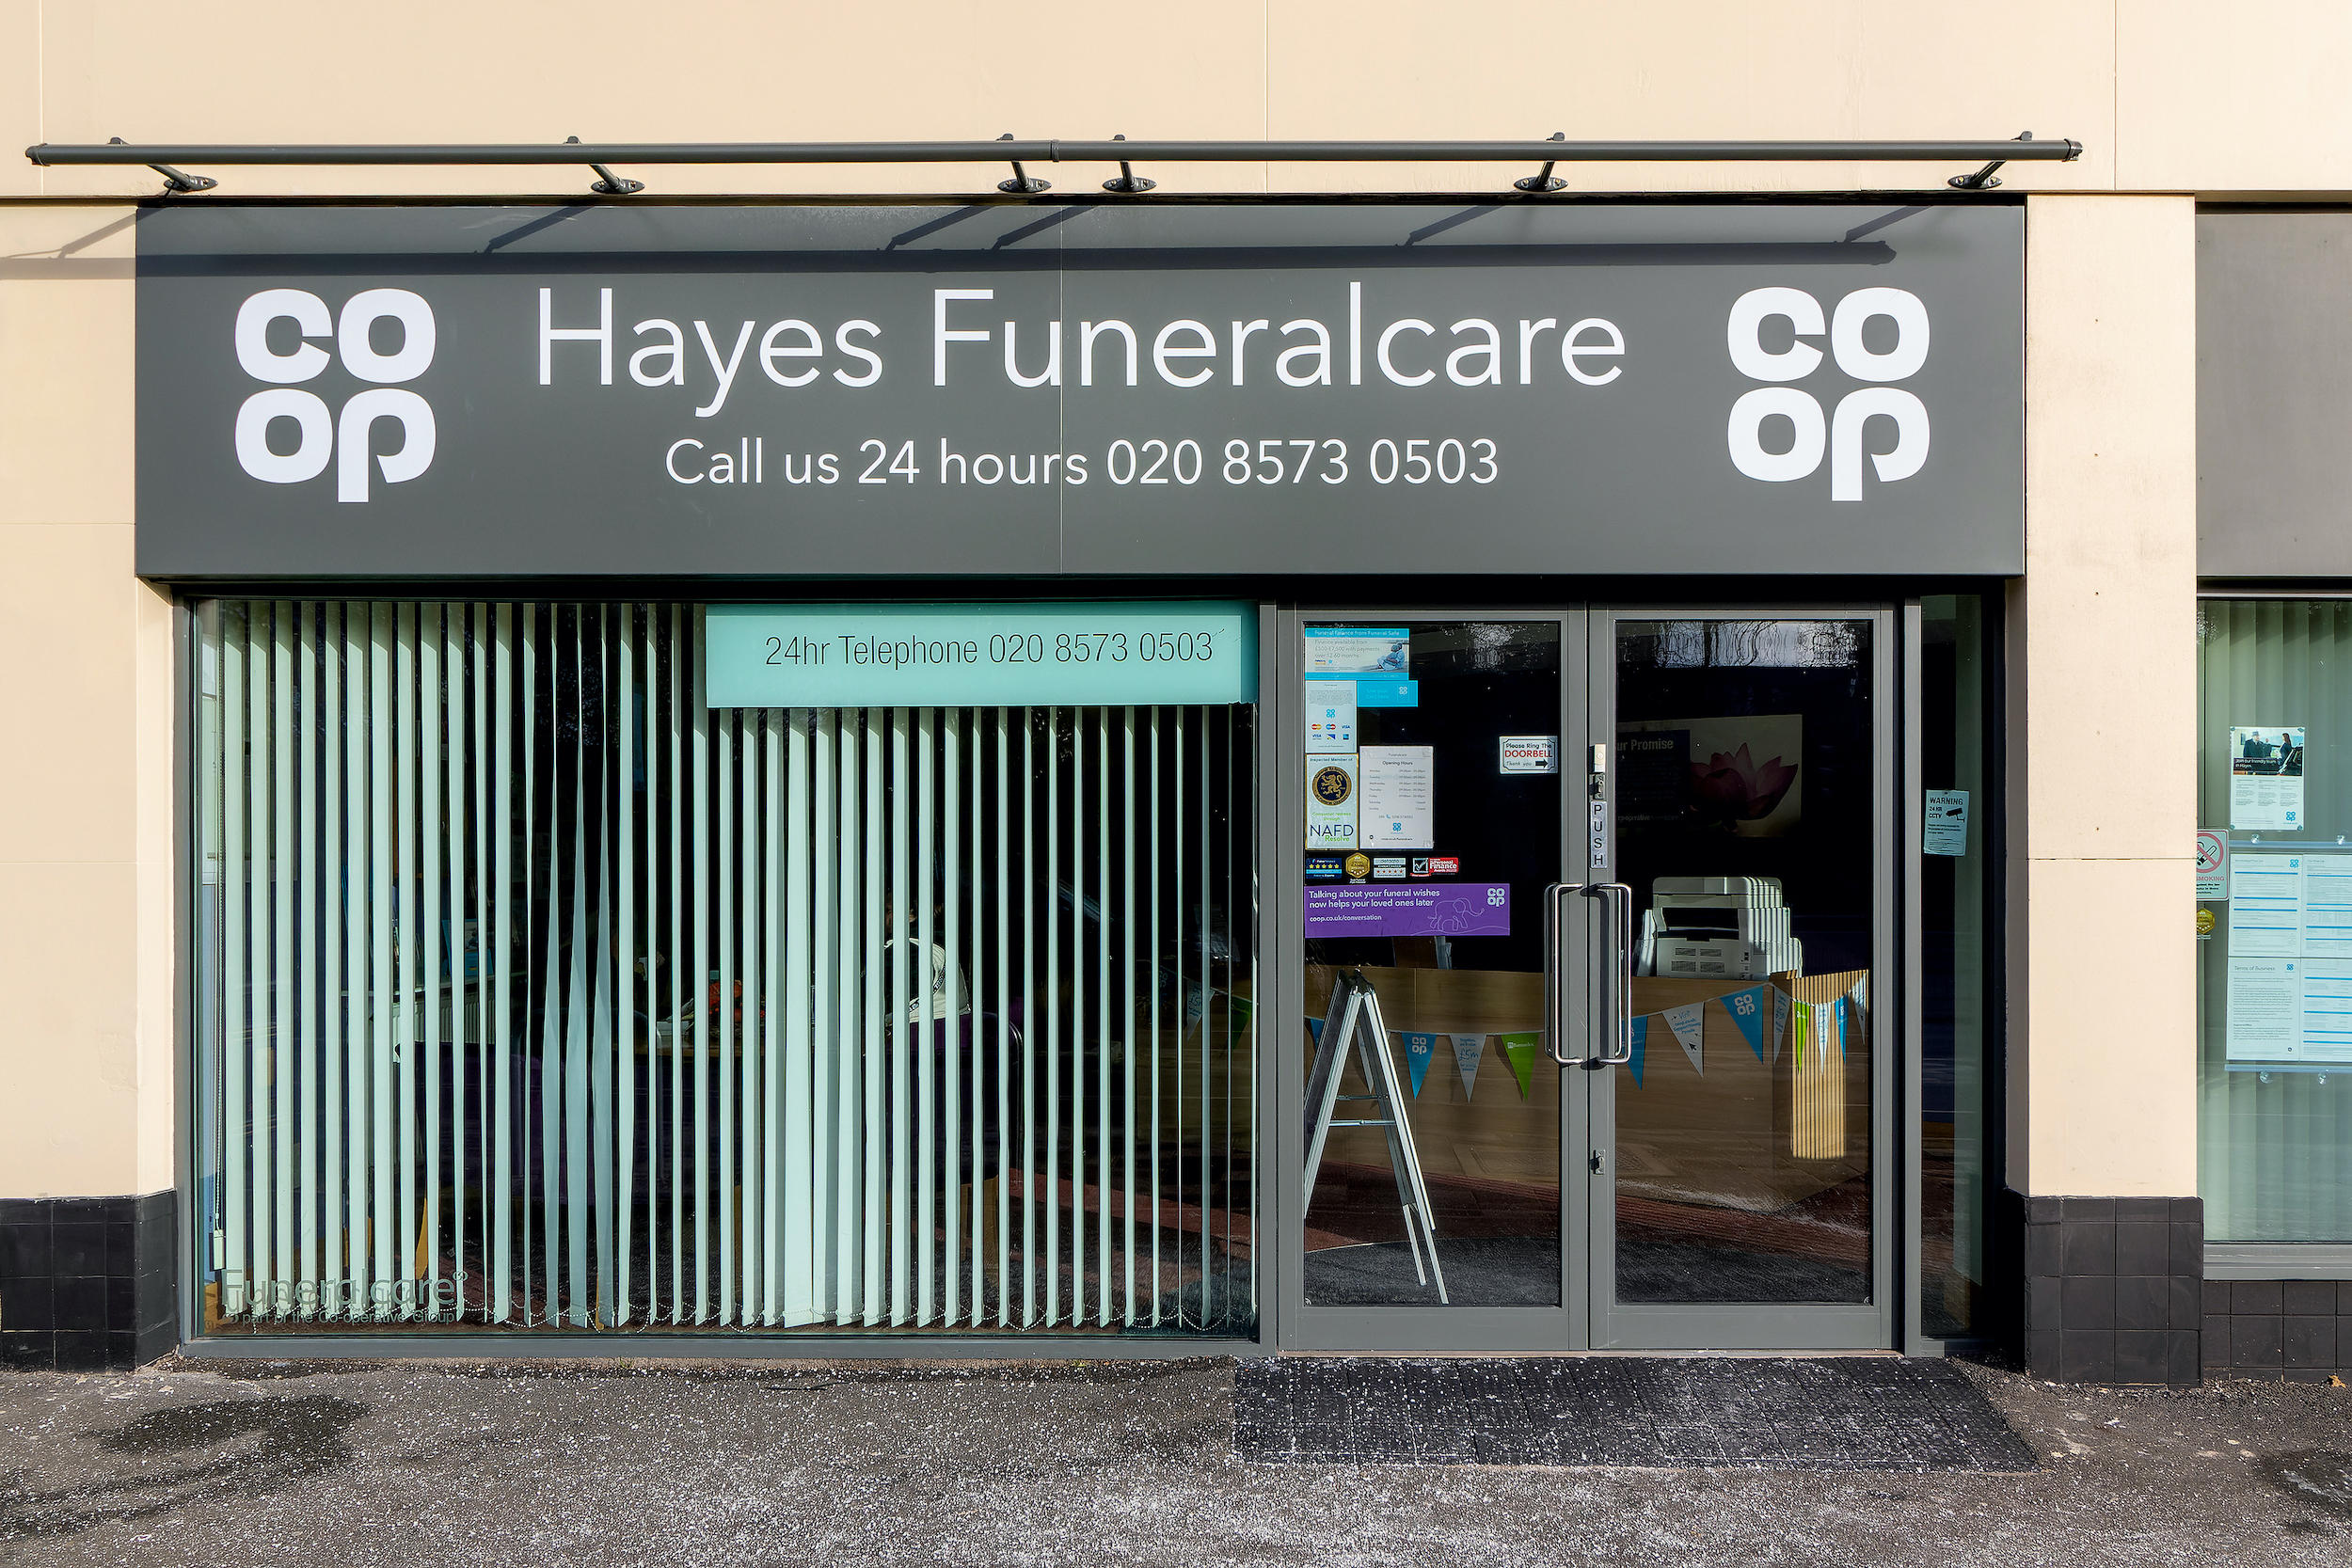 Images Co-op Funeralcare, Hayes